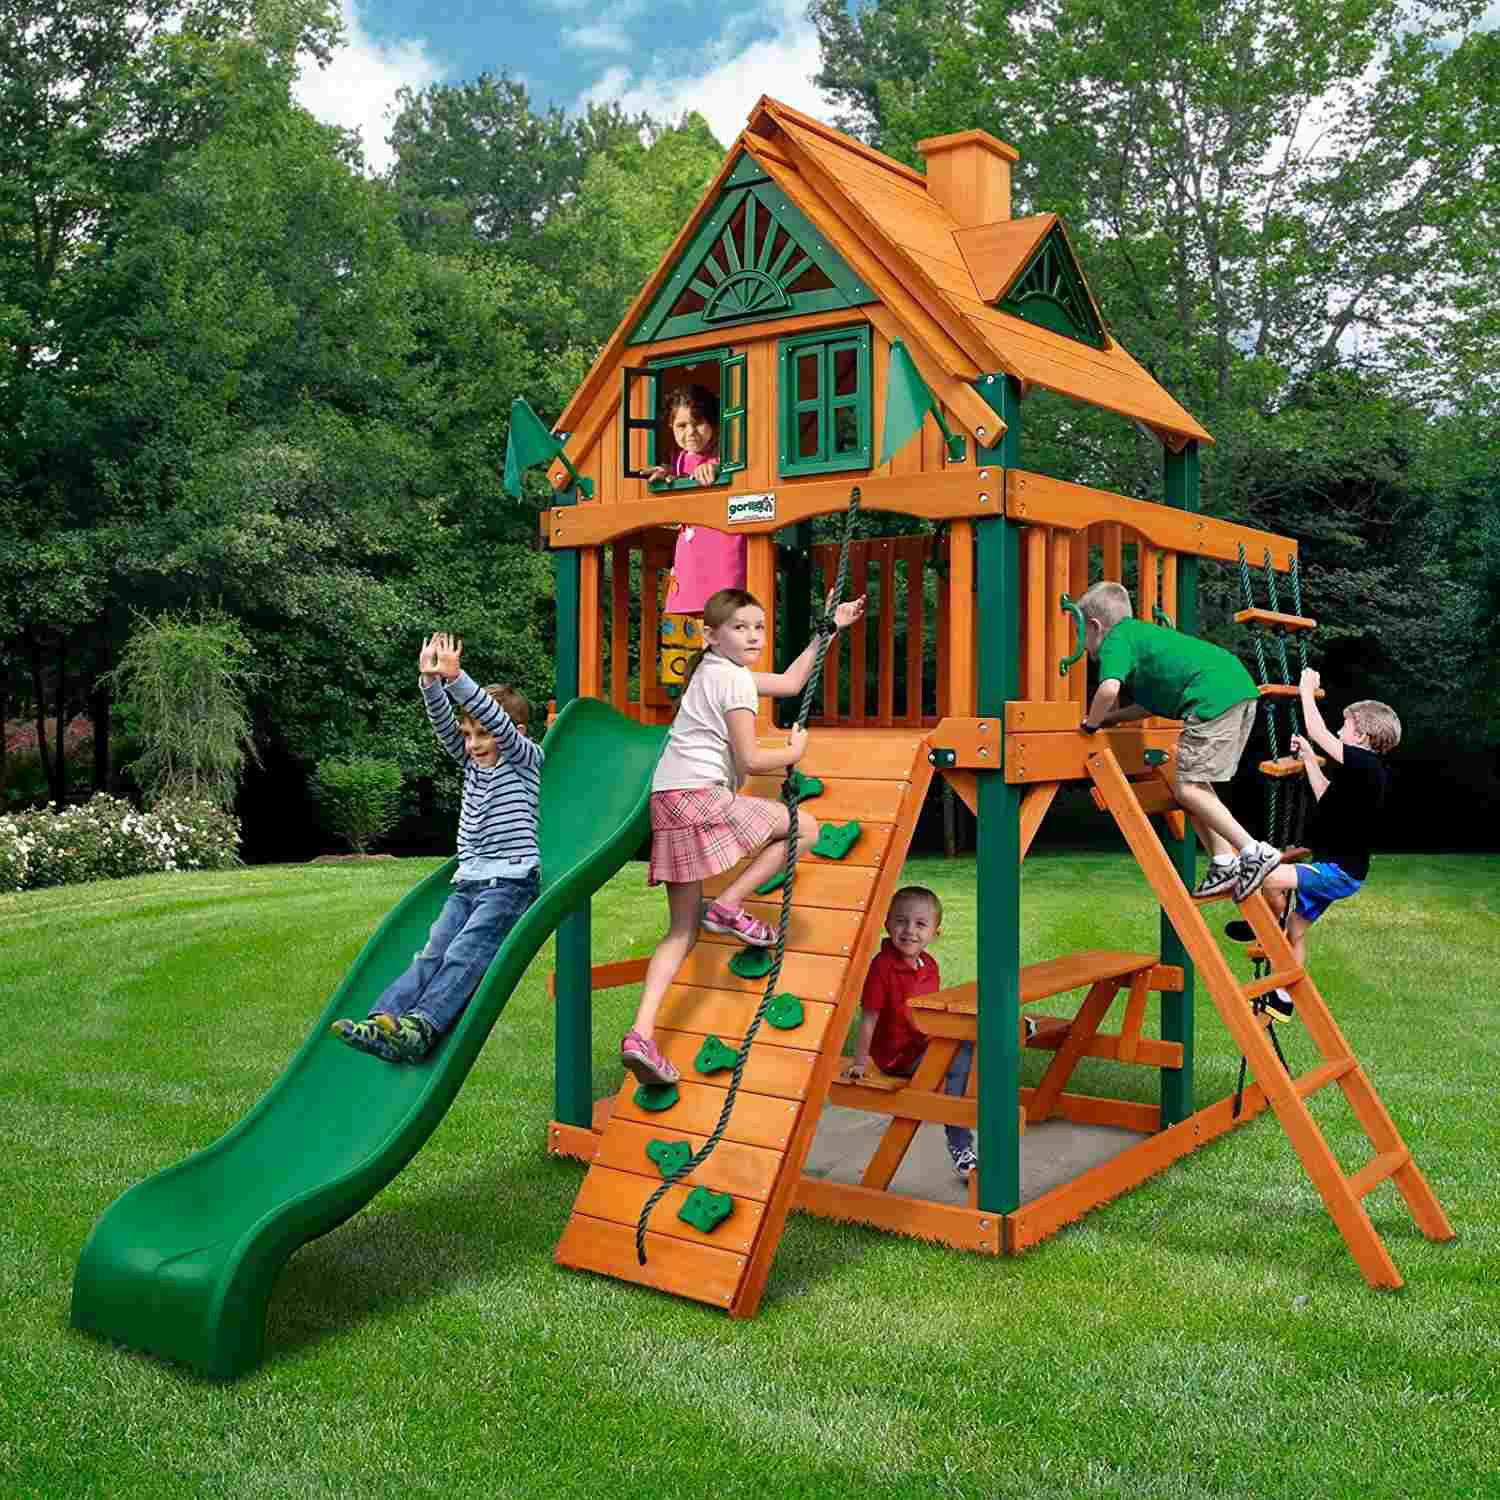 Best Kids Swing Set
 The 8 Best Wooden Swing Sets and Playsets to Buy in 2018